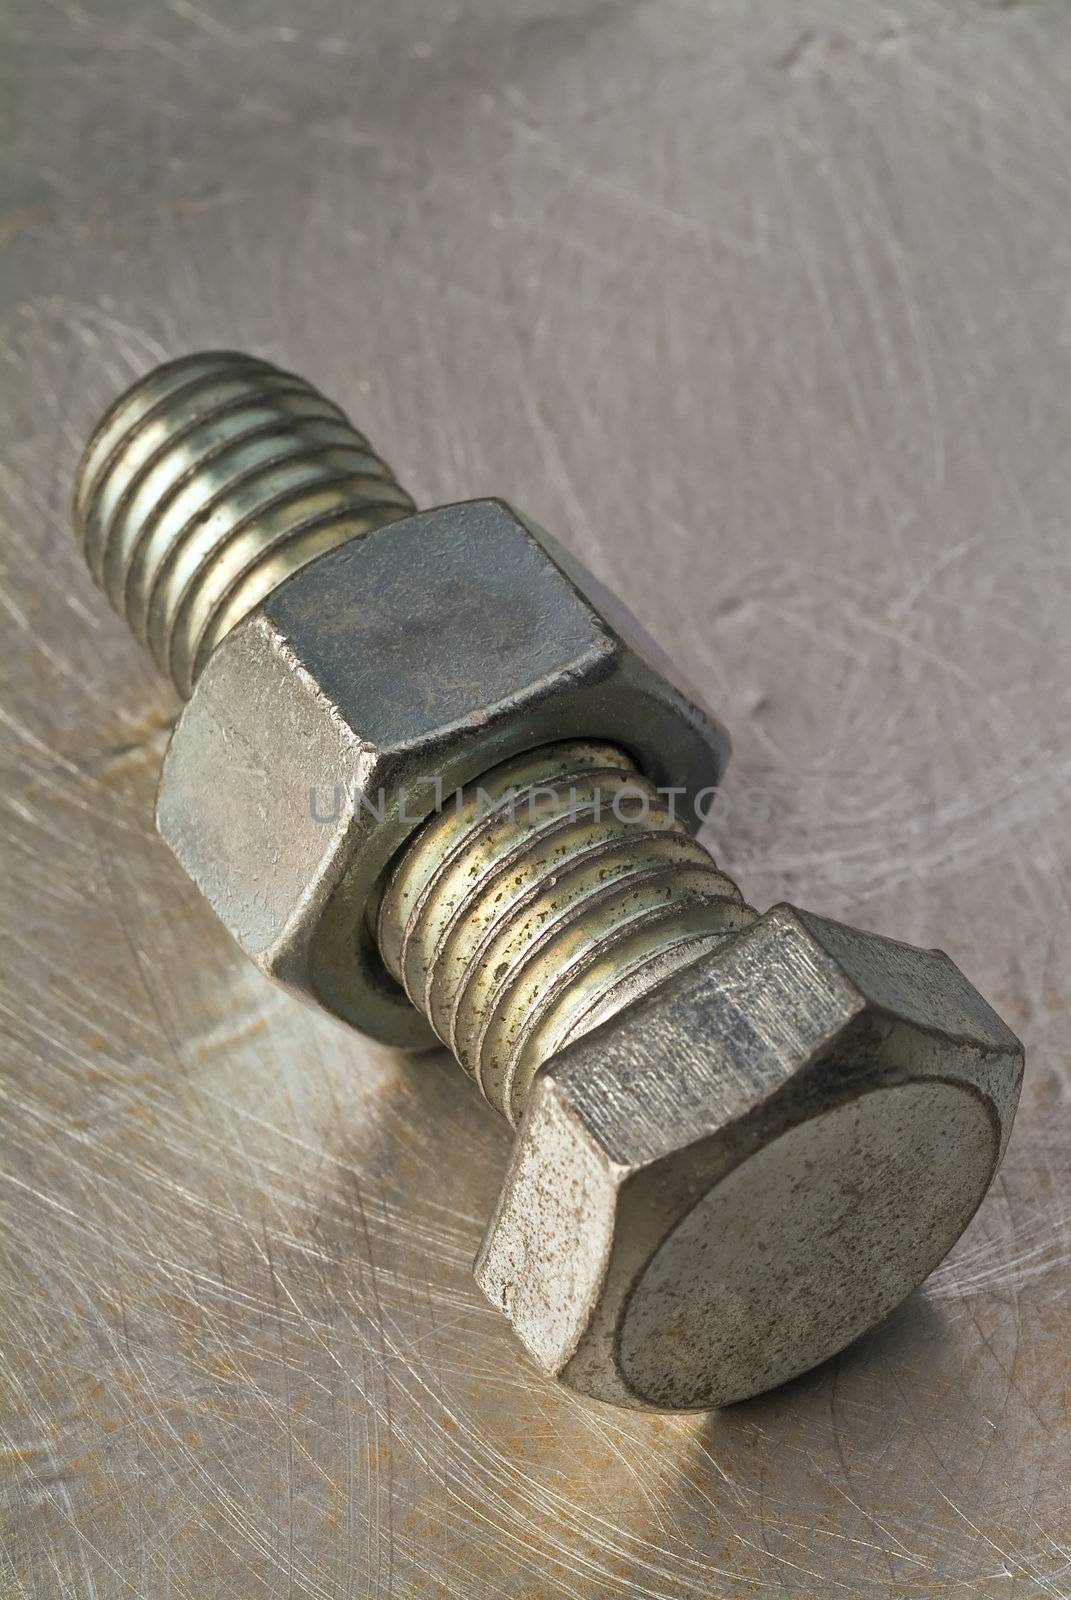 bolt and nut on metallic background